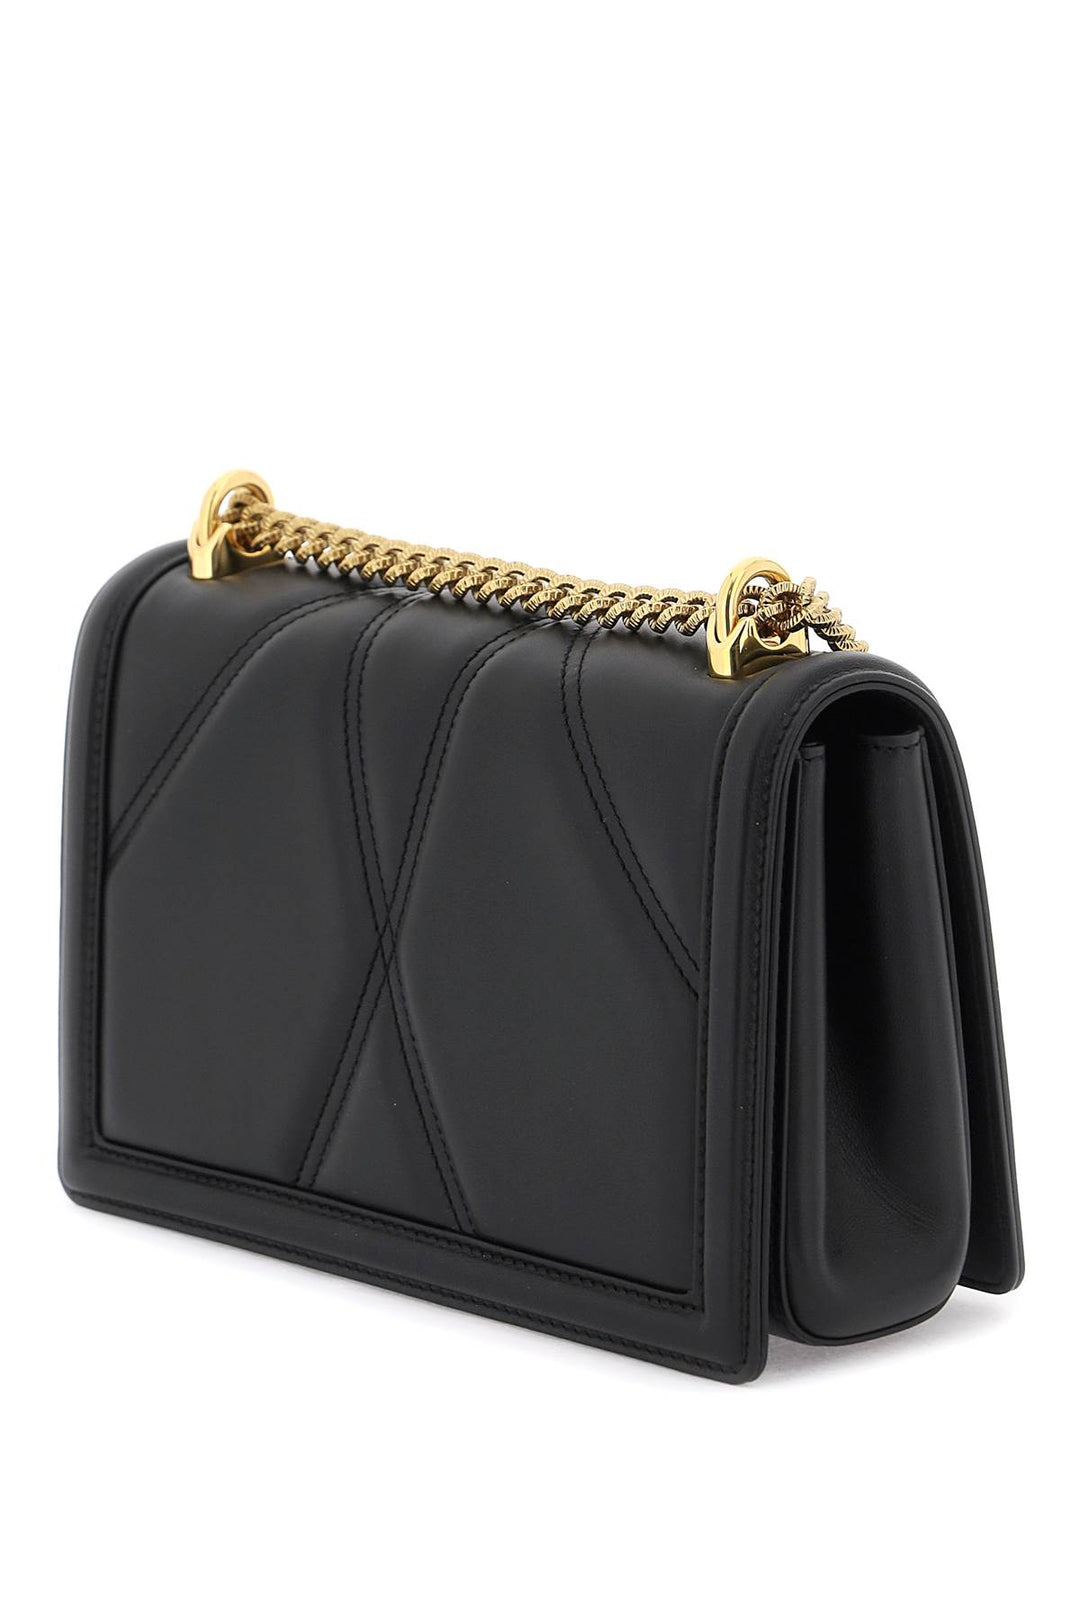 Dolce & Gabbana Medium Devotion Bag In Quilted Nappa Leather   Black